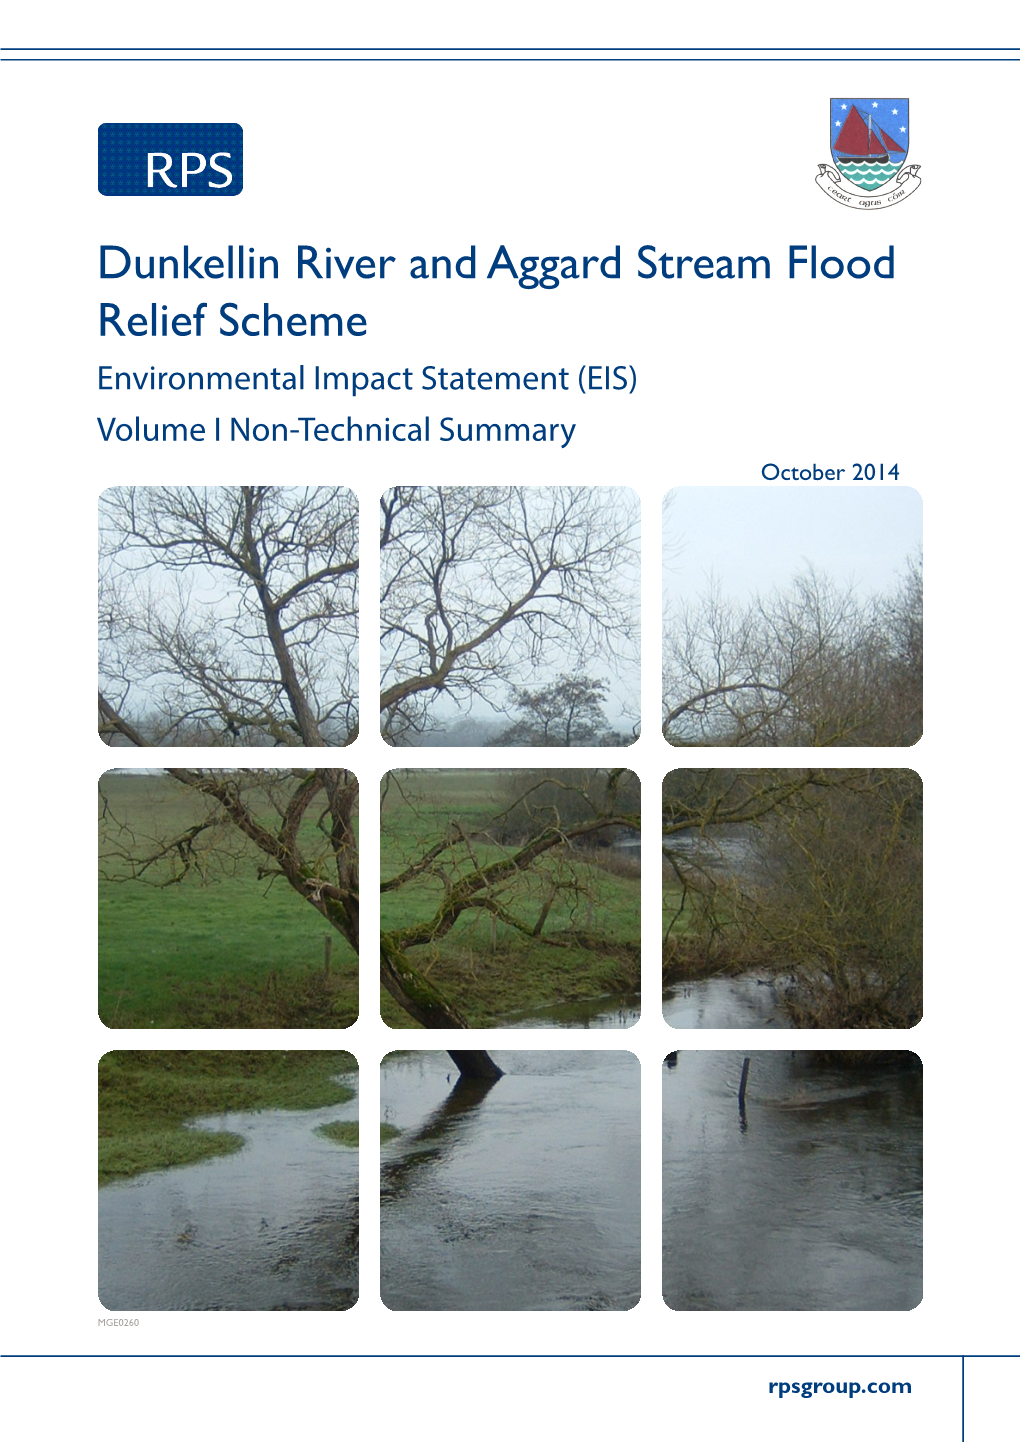 Dunkellin River and Aggard Stream Flood Relief Scheme Environmental Impact Statement (EIS) Volume I Non-Technical Summary October 2014